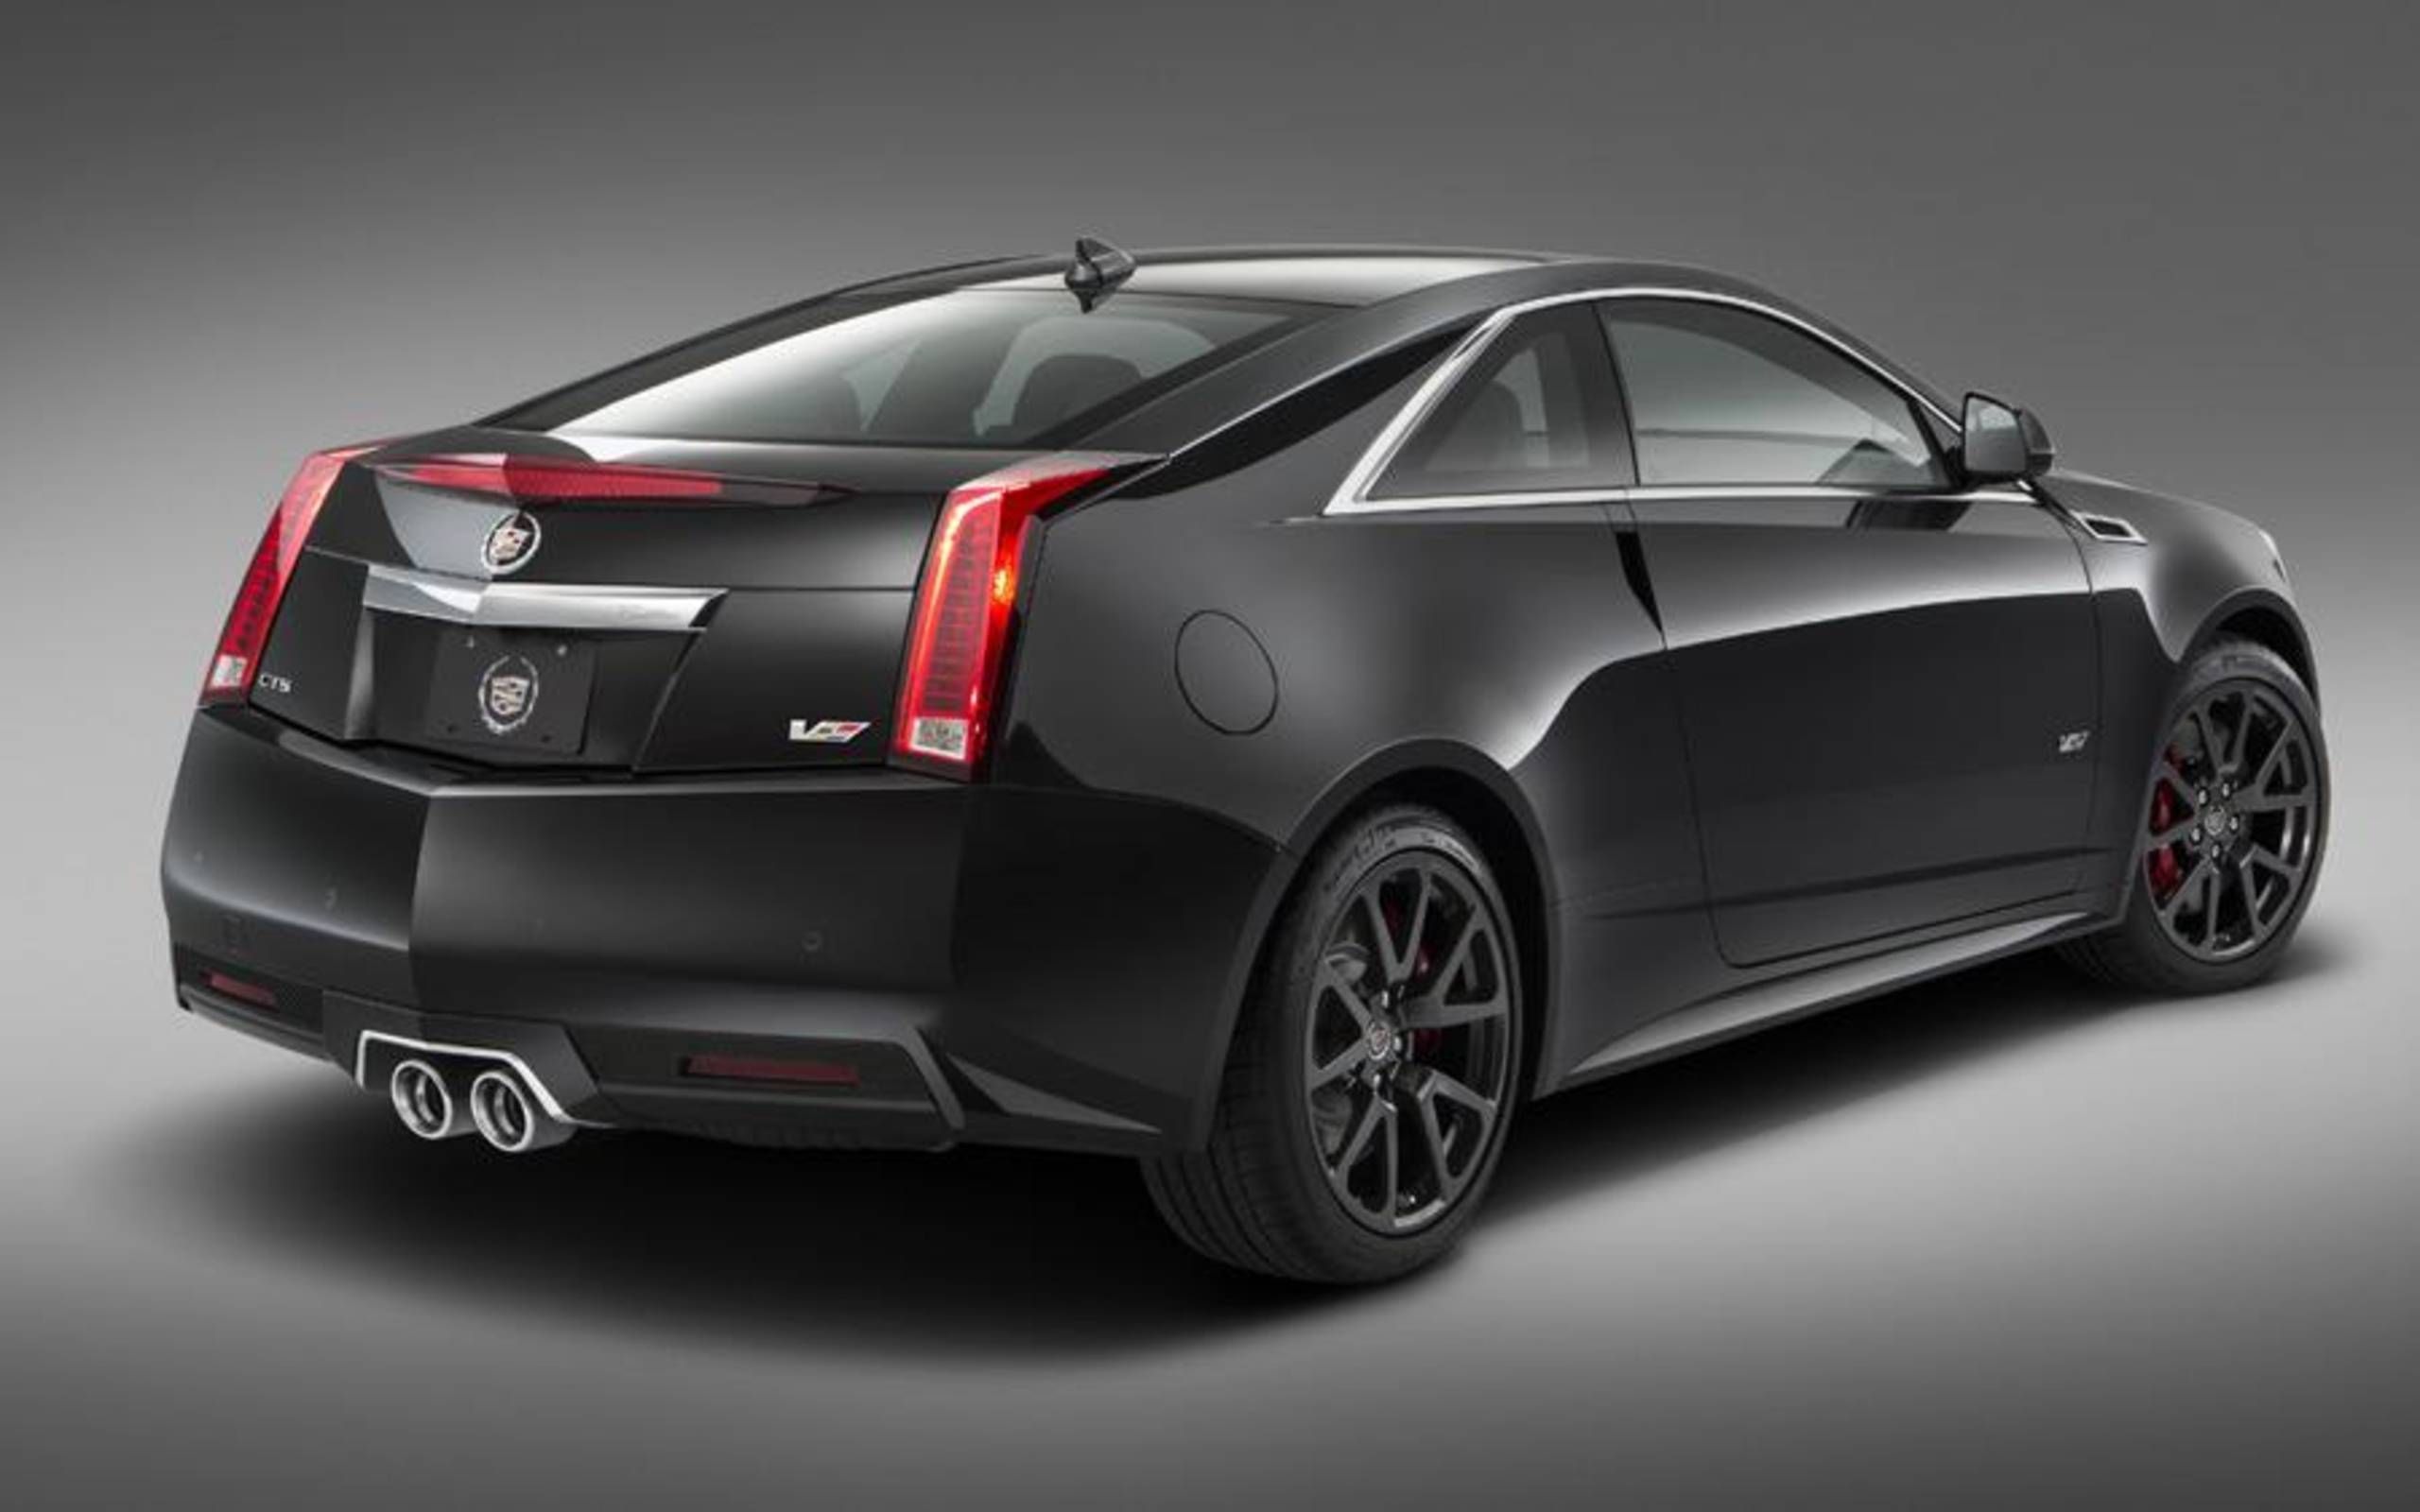 2015 Cadillac CTS-V coupe limited to 500 cars